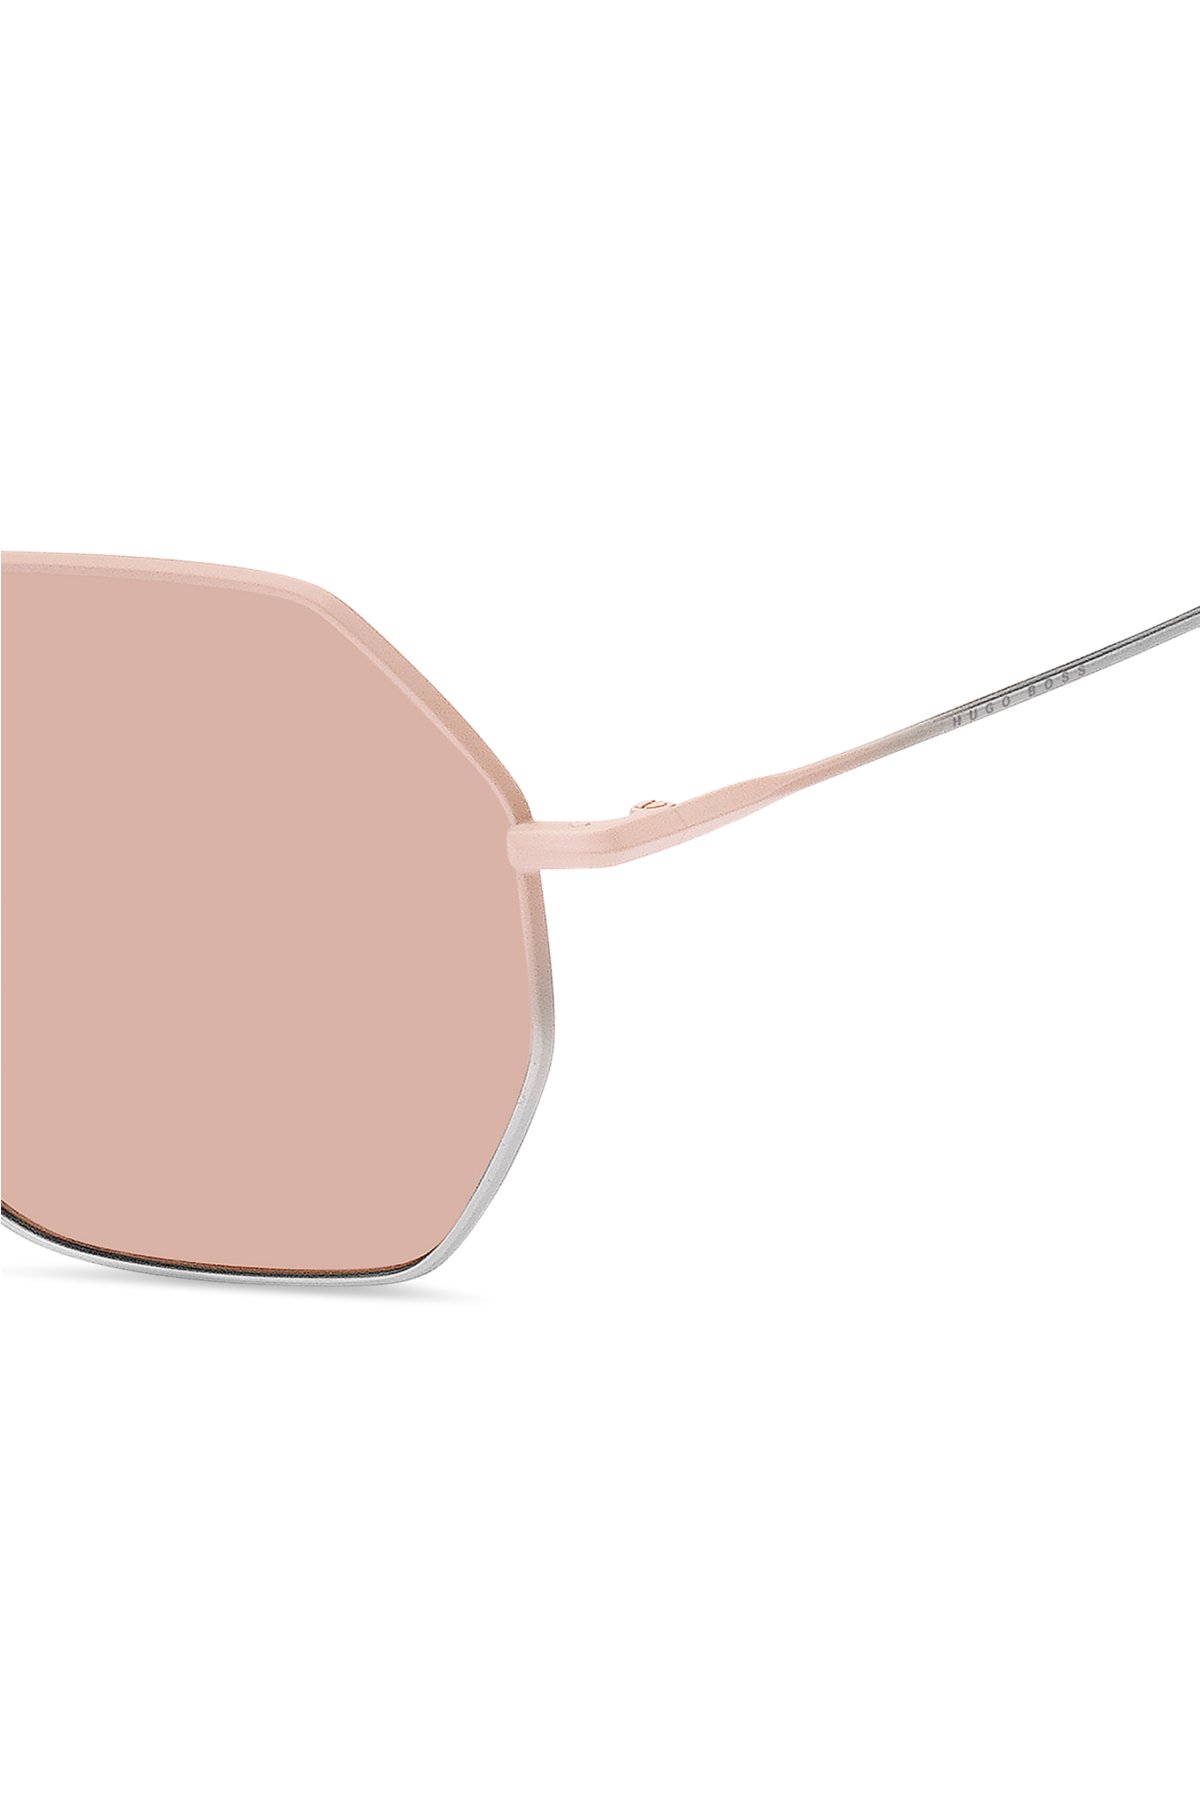 Tubular-temple sunglasses with pink-silver gradients, Pink